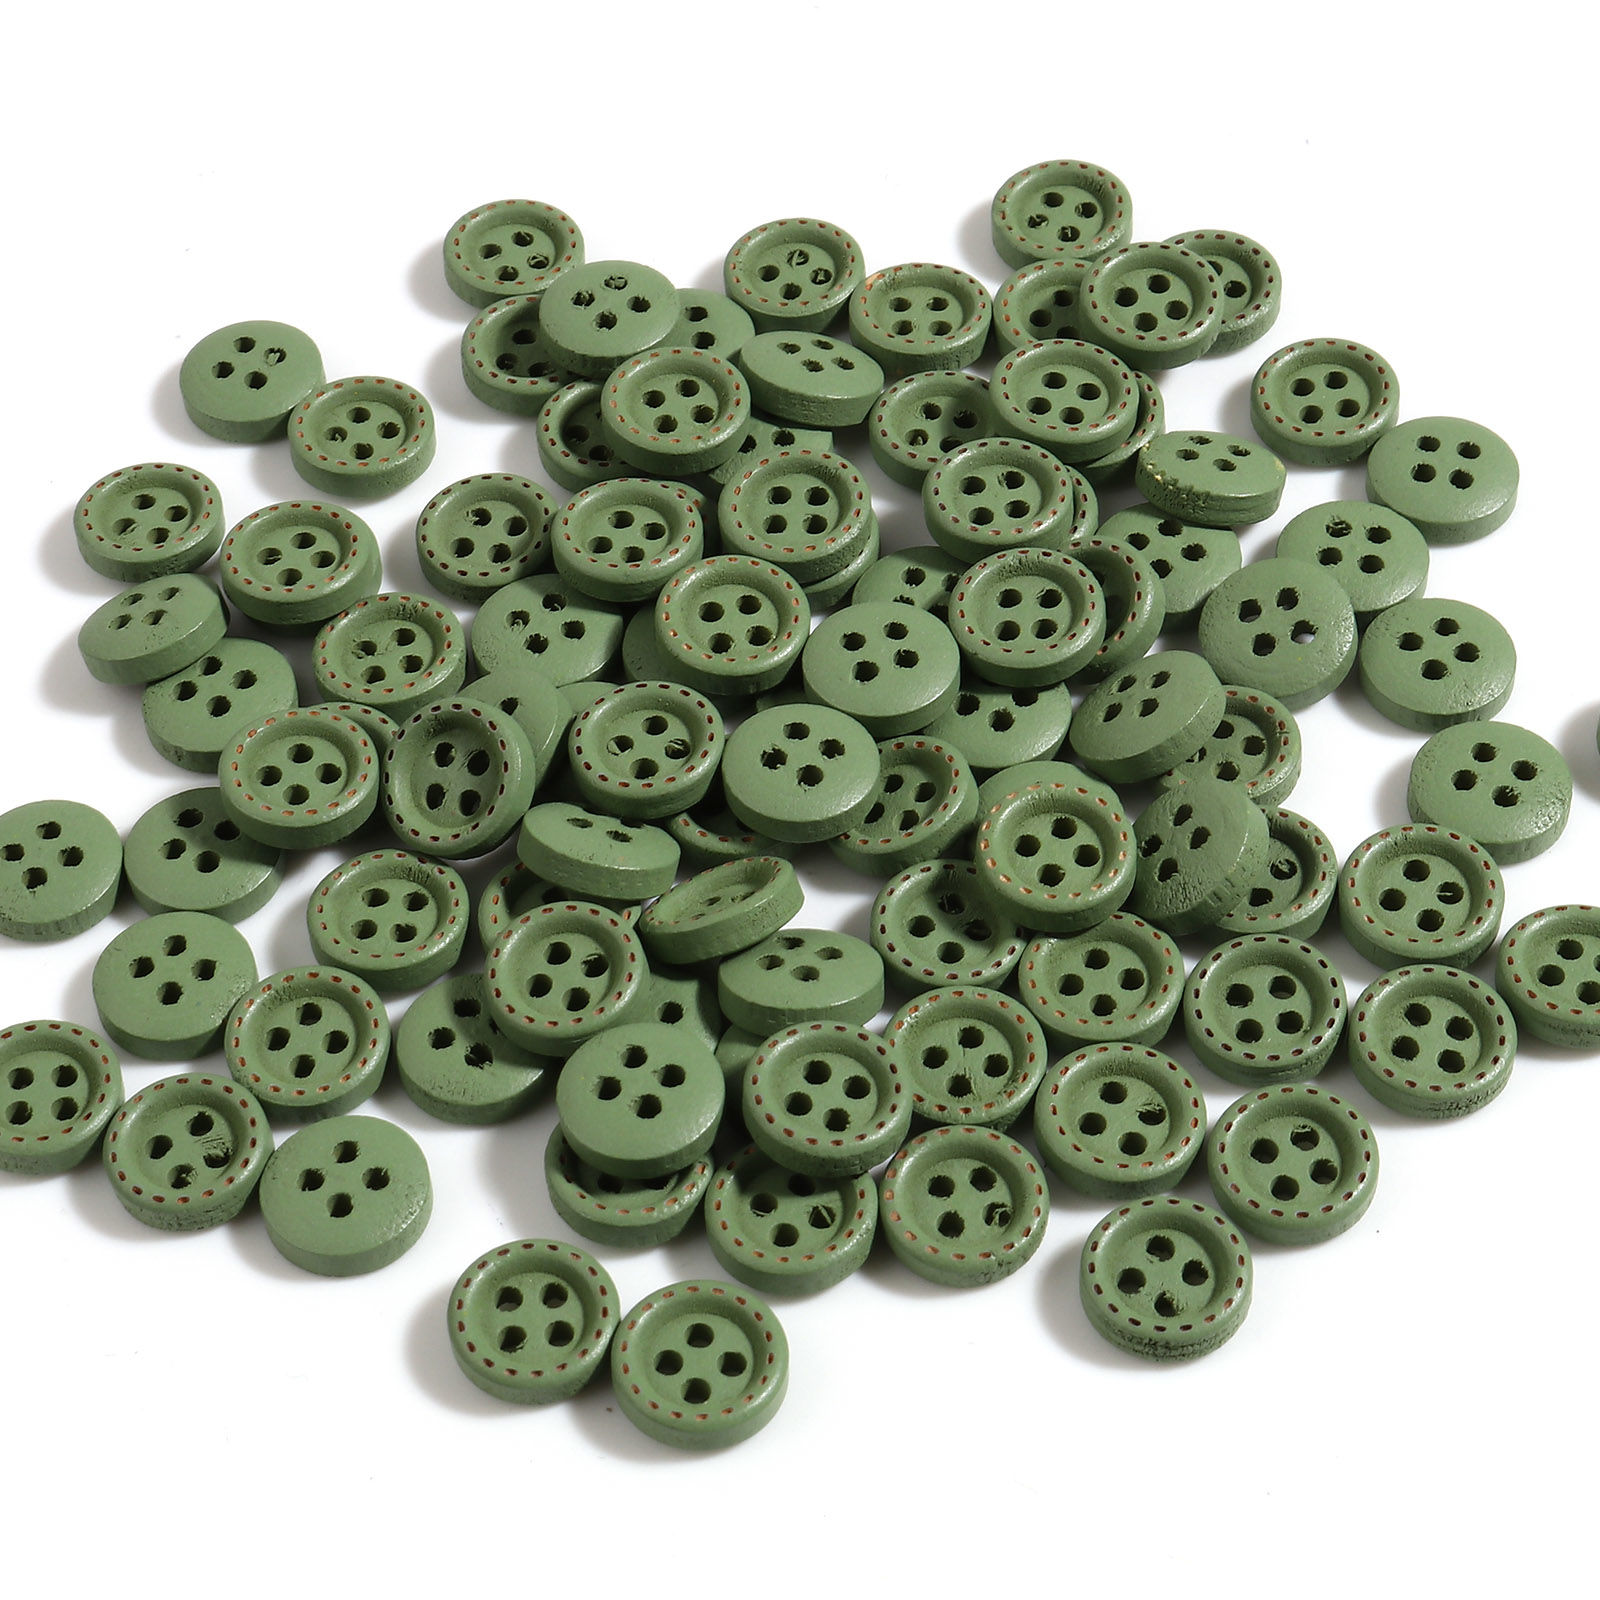 Picture of Wood Sewing Buttons Scrapbooking 4 Holes Round Army Green 10mm Dia., 100 PCs